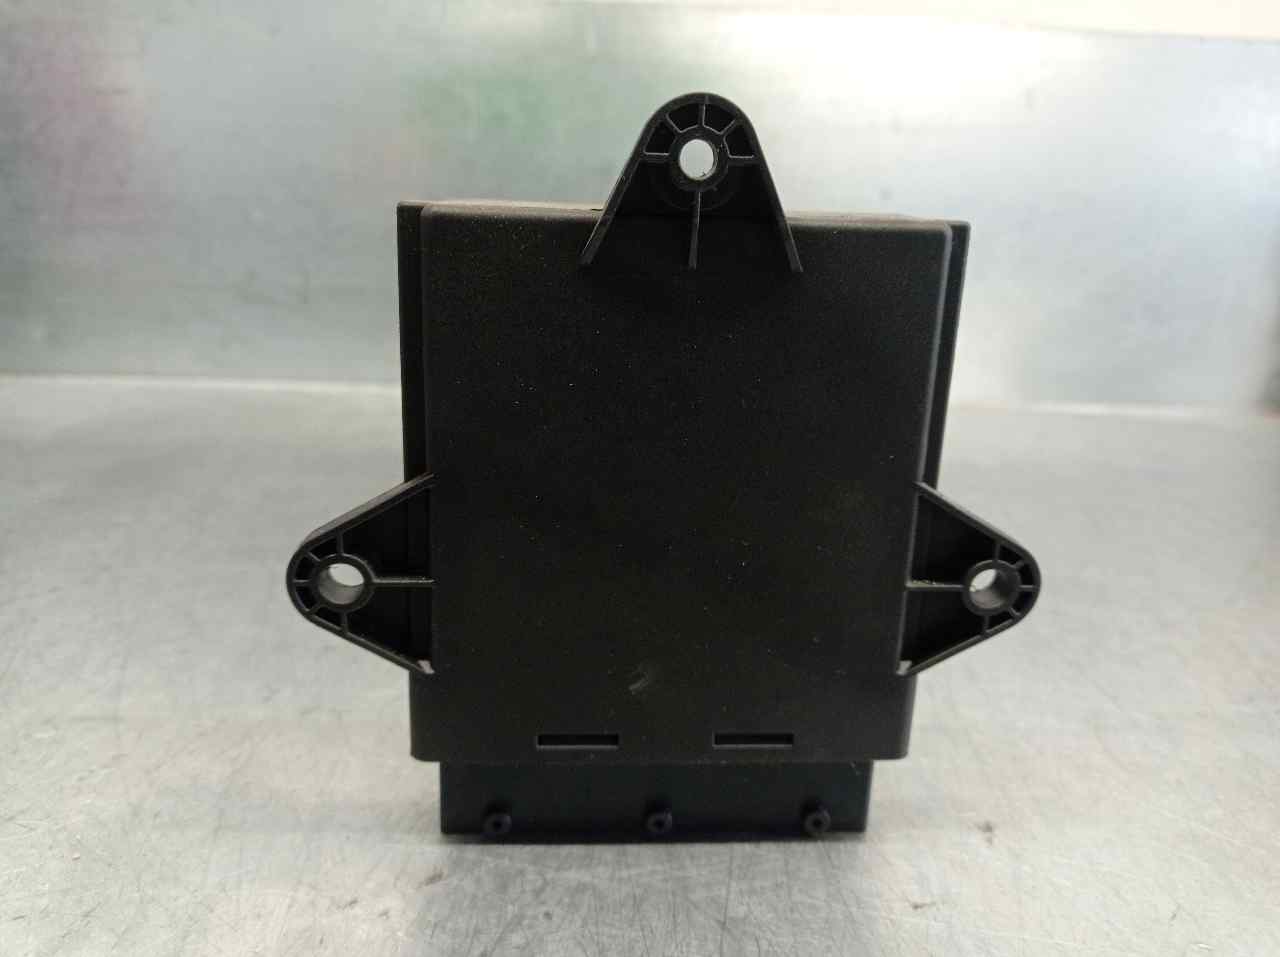 OPEL Vectra C (2002-2005) Other Control Units 13111456 19802282